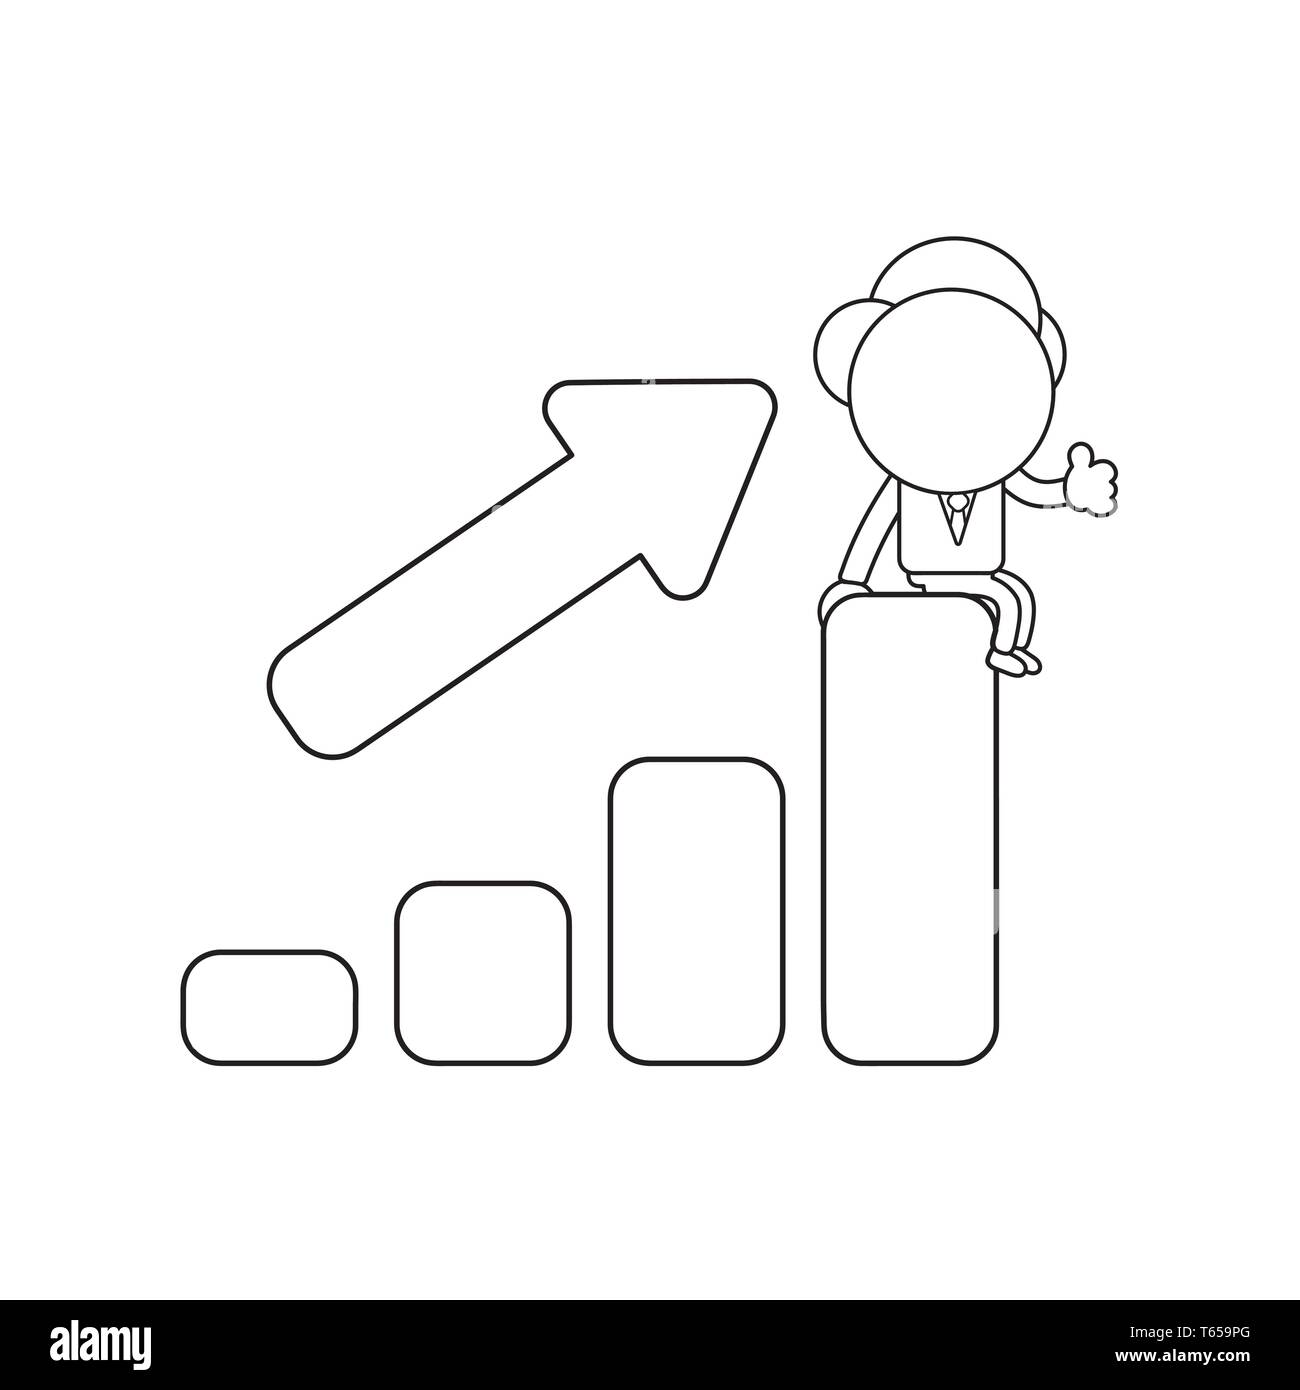 Vector illustration businessman character sitting on sales bar graph moving up and gesturing thumbs up. Black outline. Stock Vector